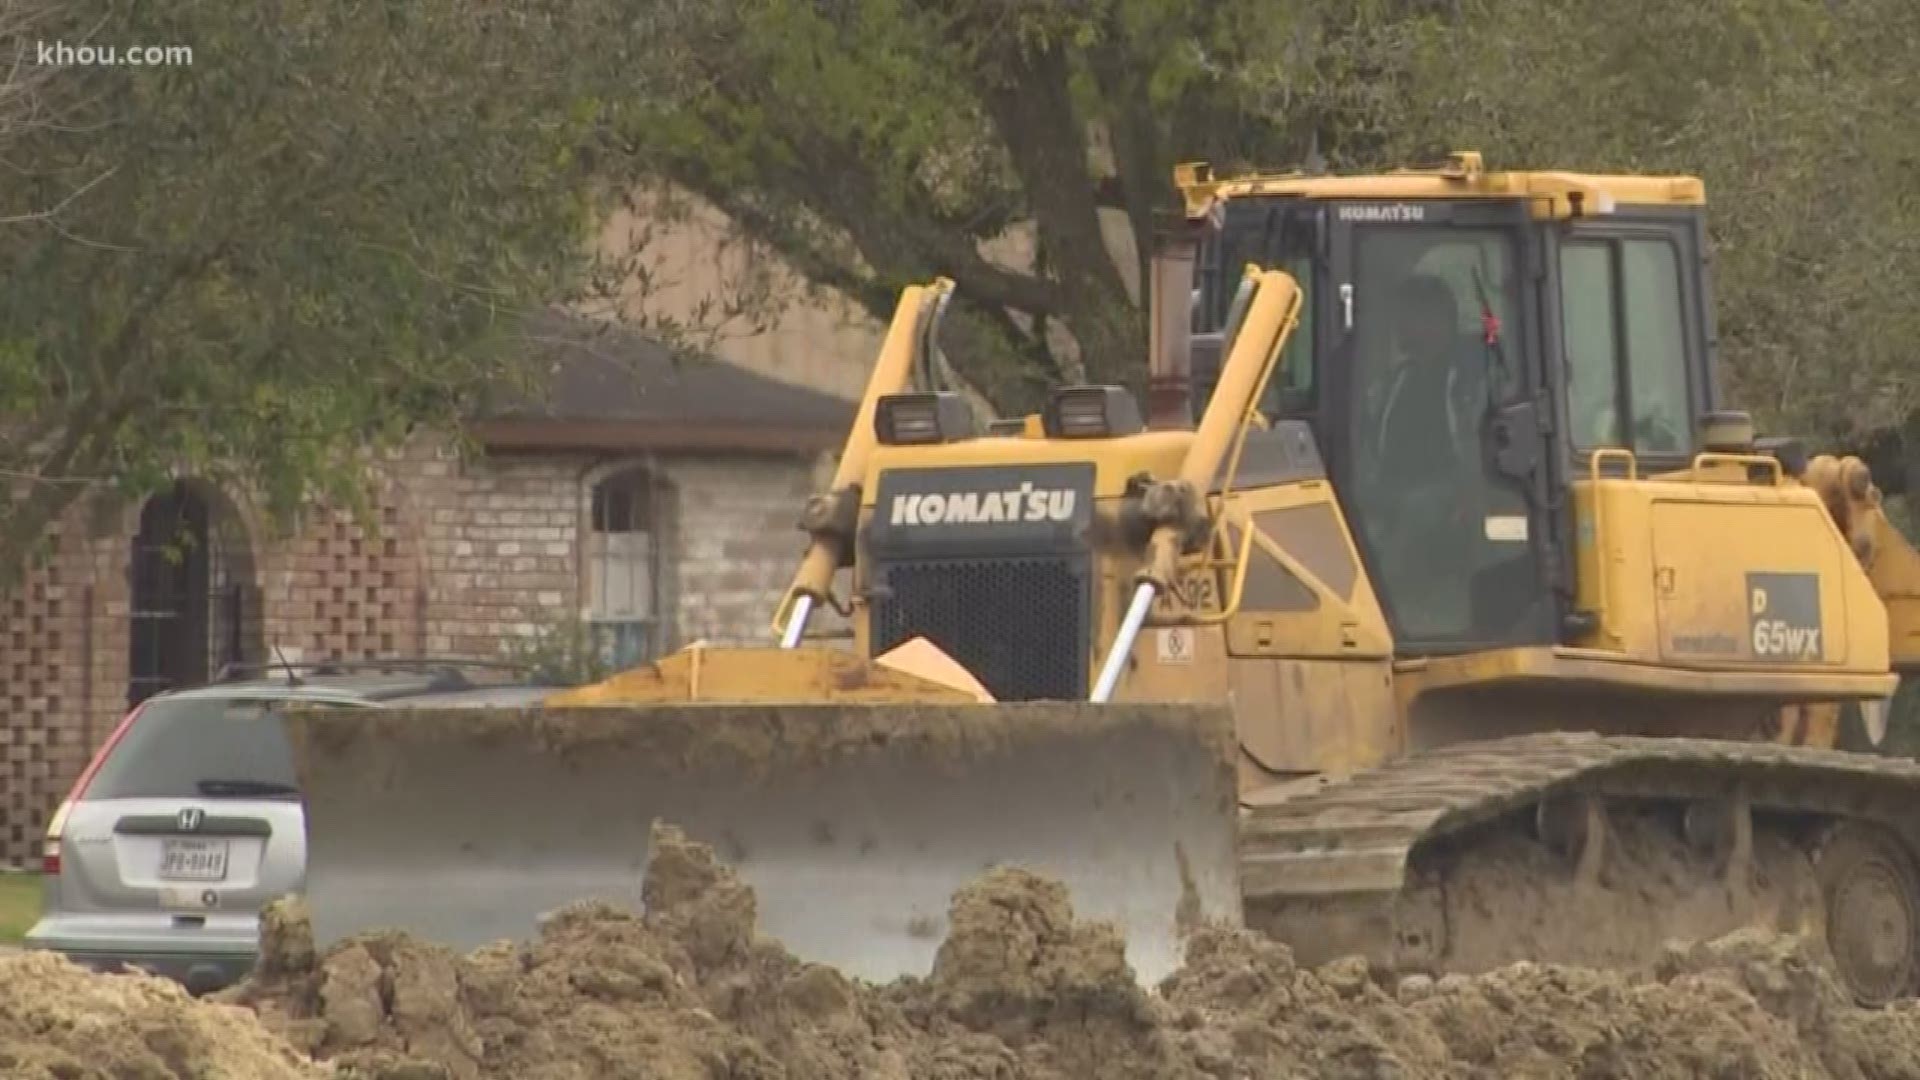 There are concerns about projects being planned to fight future flooding. Six months ago, Harris County voters approved a $2.5 billion bond project to pay for it all.